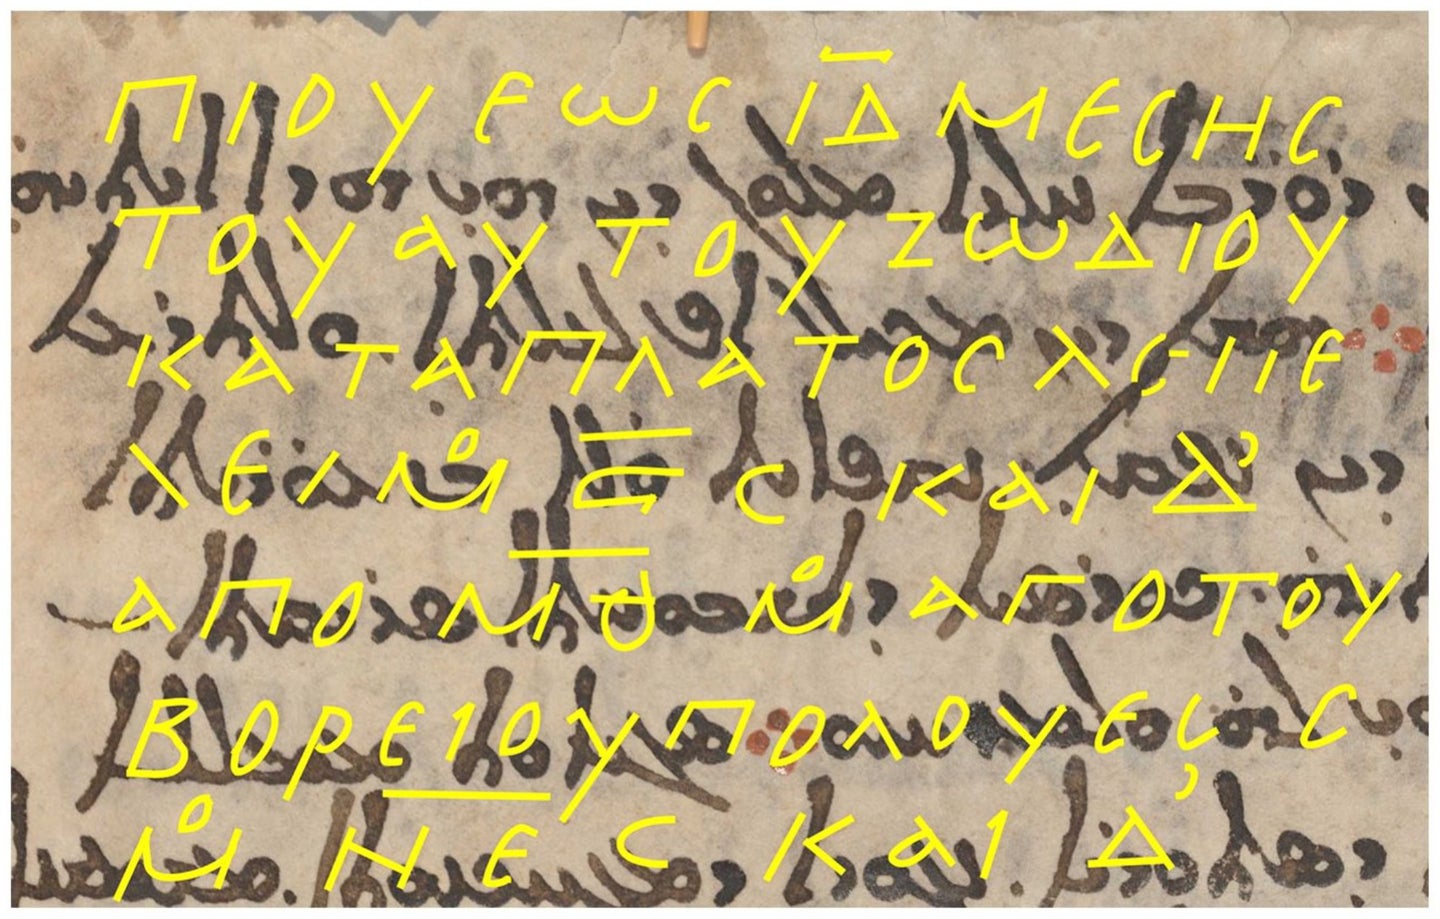 Parchment from St. Catherine's Monastery showing the tracings of older writings highlighted in yellow. (Museum of the Bible, 2021/CC BY-SA 4.0)